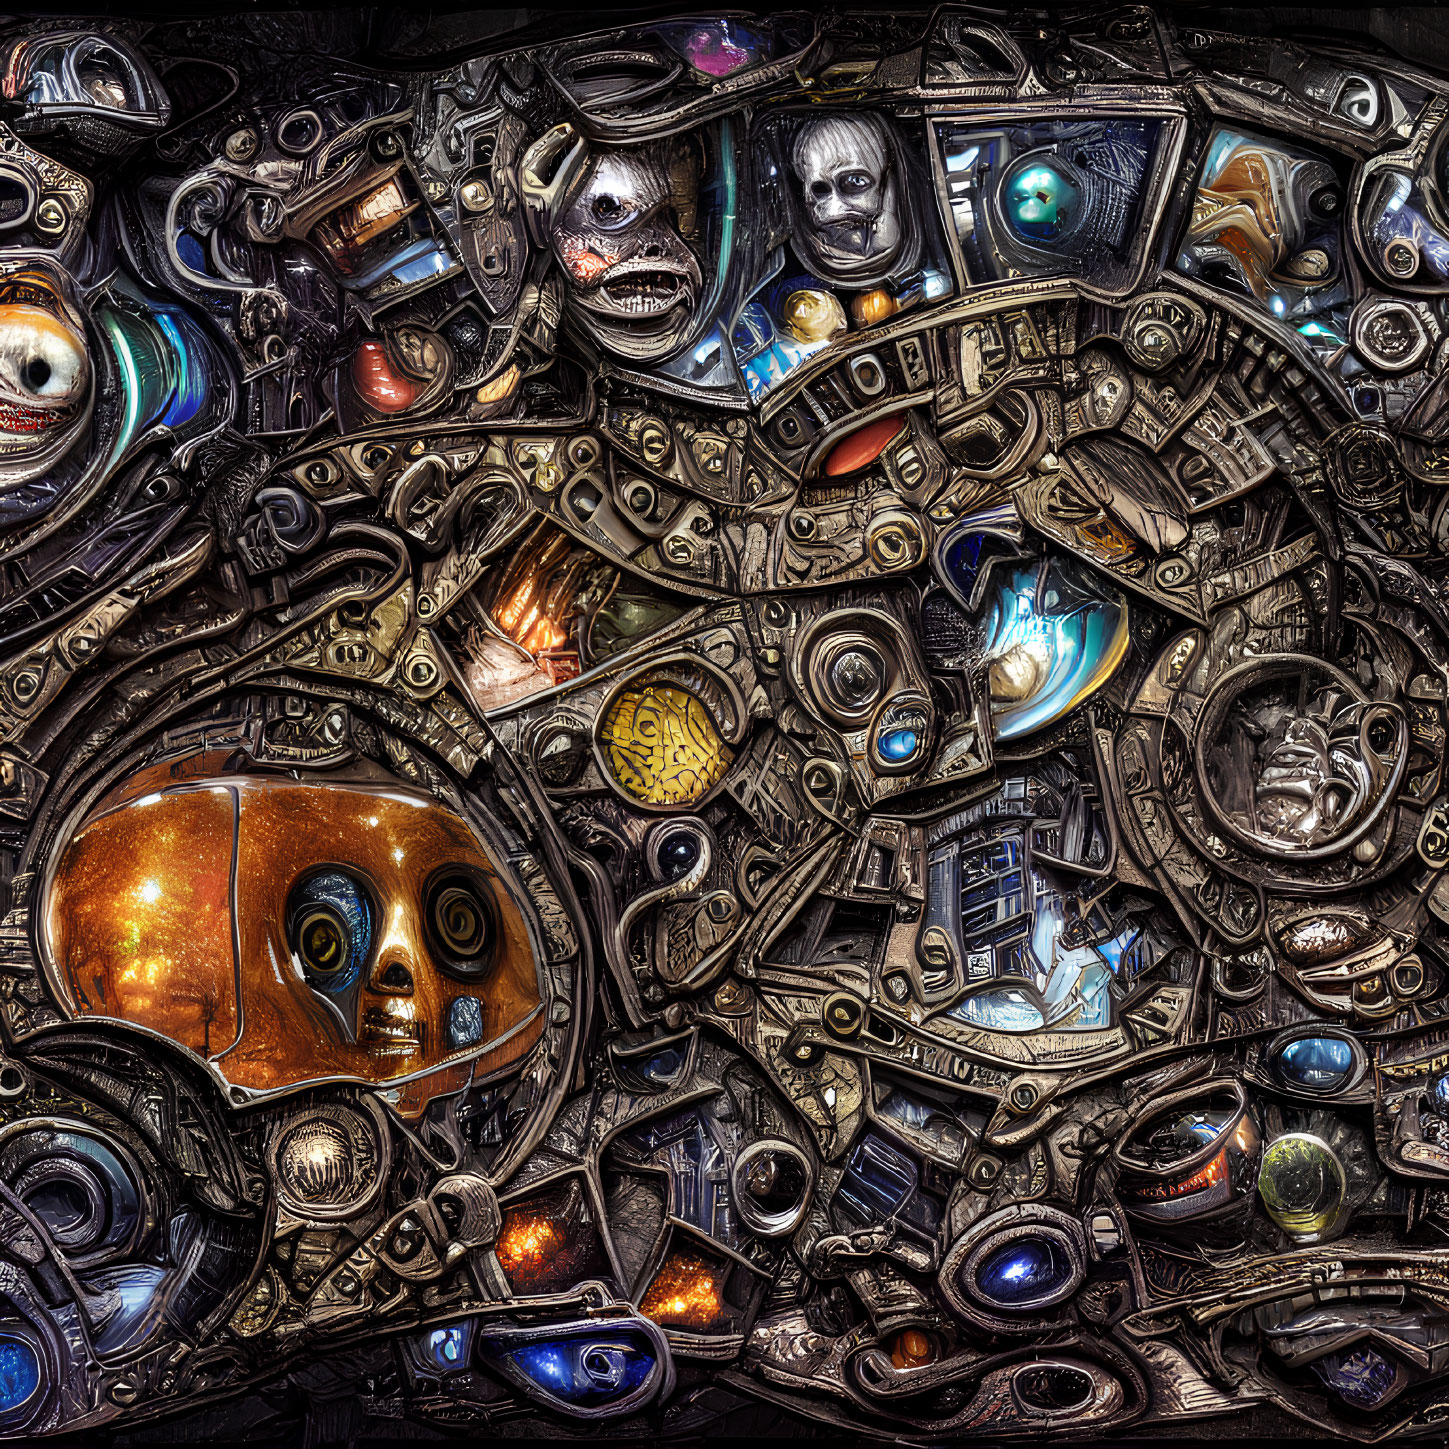 Intricate surreal collage with faces, eyes, gears, and technology